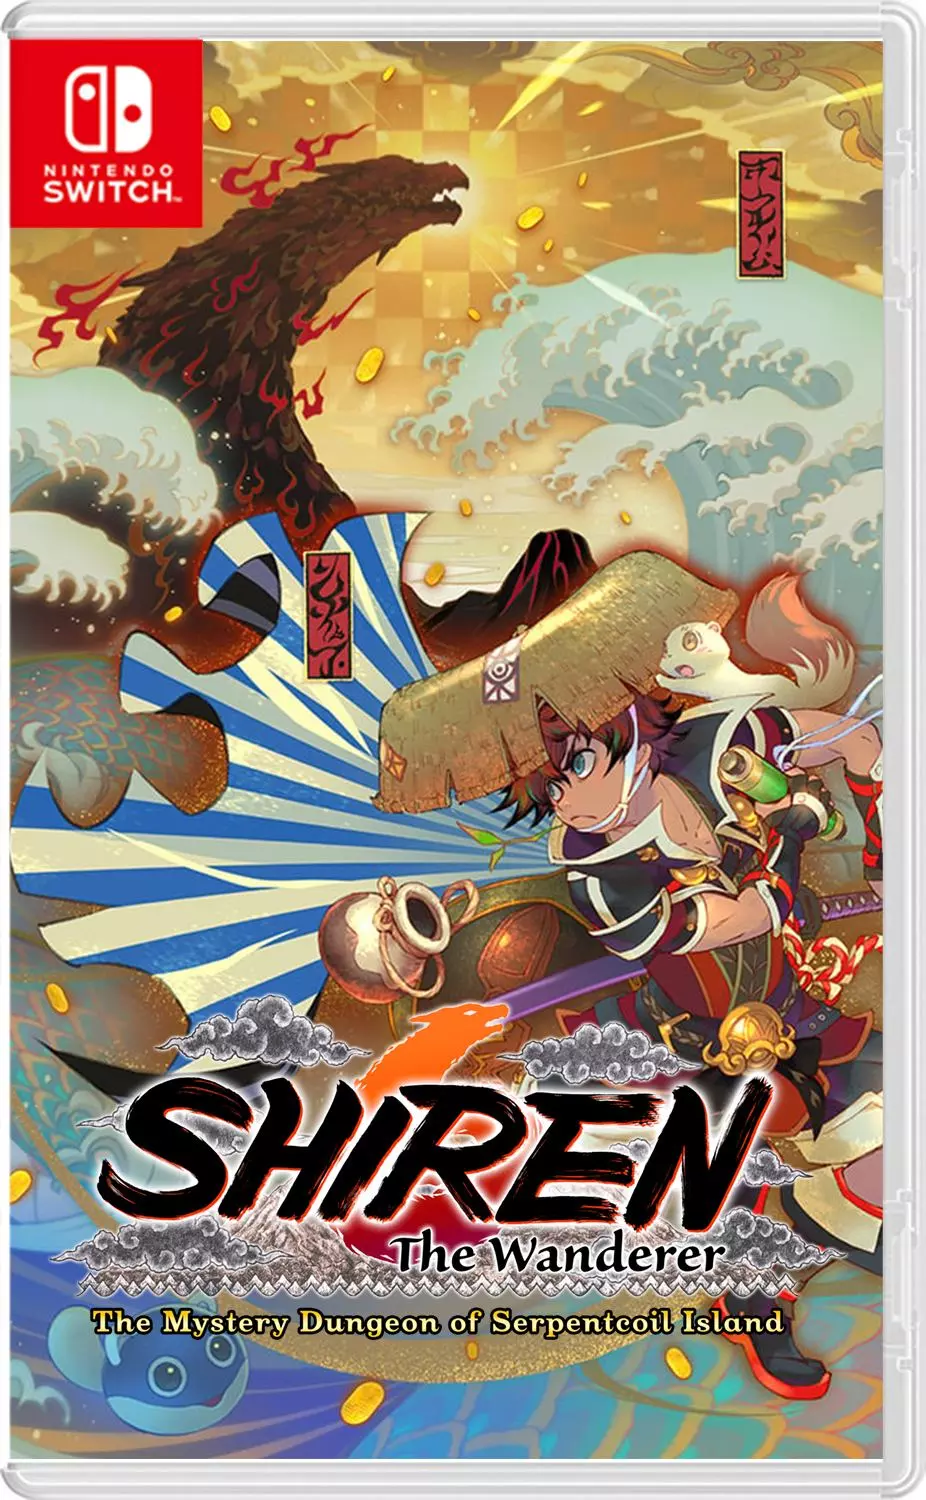 Shiren The Wanderer: The Mystery Dungeon